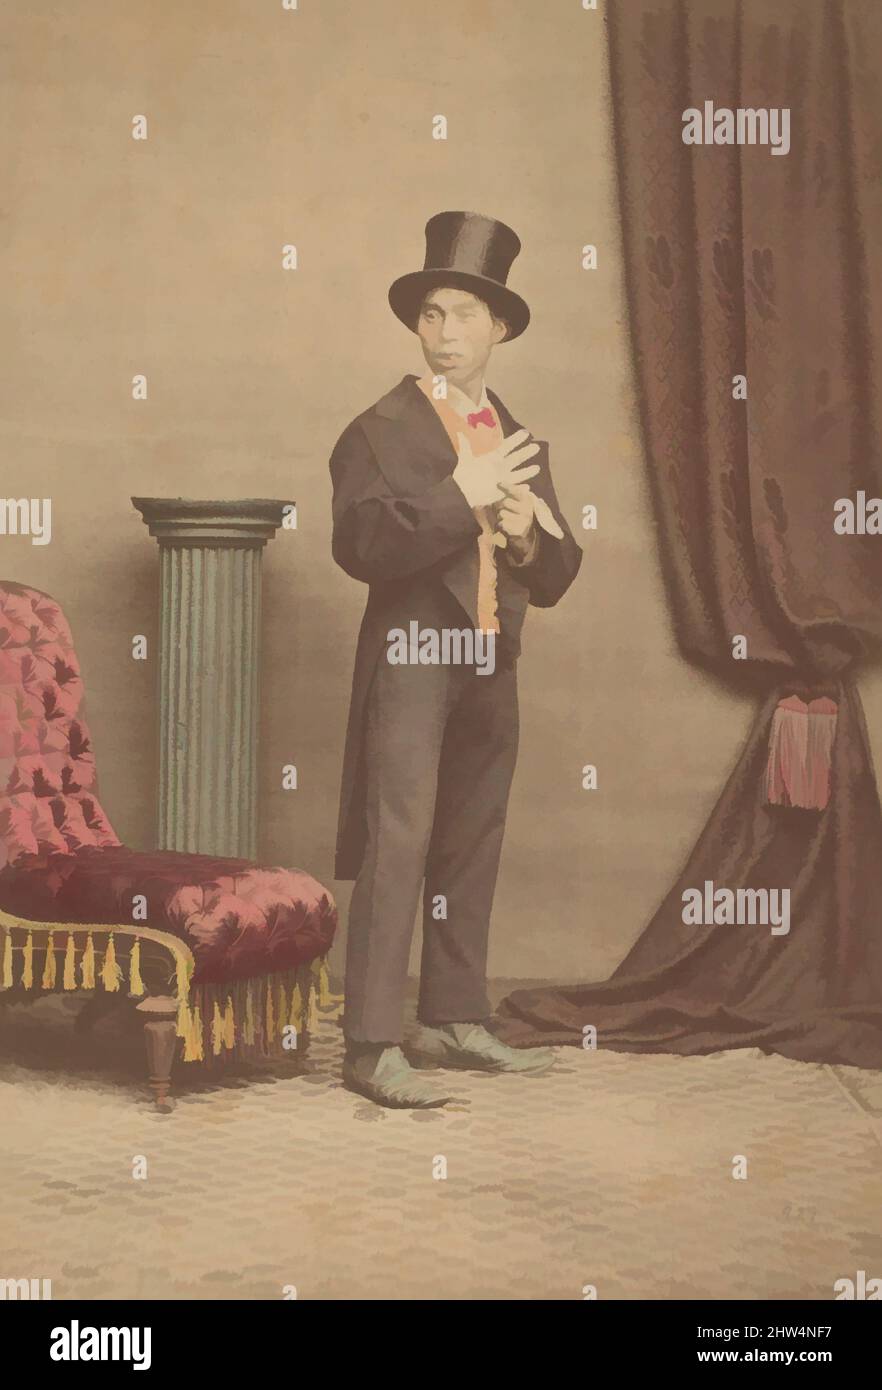 Art inspired by Studio Portrait of a Japanese Man in Western Clothing, 1880s, Albumen silver print, Image: 14.2 x 9.7 cm (5 9/16 x 3 13/16 in.), Photographs, Raimund von Stillfried (Austrian, 1839–1911, Classic works modernized by Artotop with a splash of modernity. Shapes, color and value, eye-catching visual impact on art. Emotions through freedom of artworks in a contemporary way. A timeless message pursuing a wildly creative new direction. Artists turning to the digital medium and creating the Artotop NFT Stock Photo